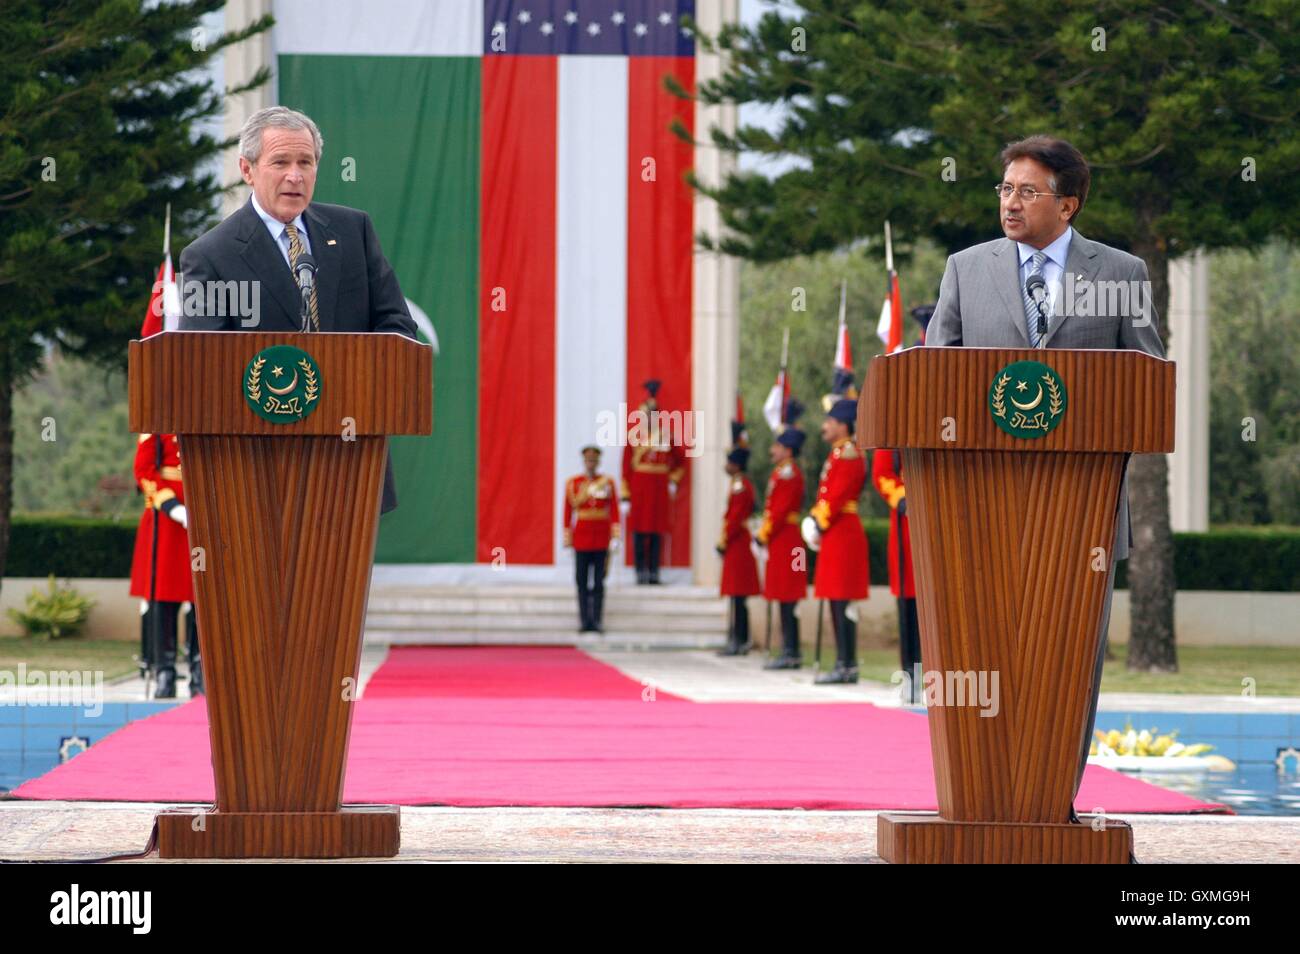 U.S. President George W. Bush speaks during a joint press conference with Pakistan President Pervez Musharraf at the official presidential residence the Aiwan-e-Sadr March 4, 2006 in Islamabad, Pakistan. Stock Photo